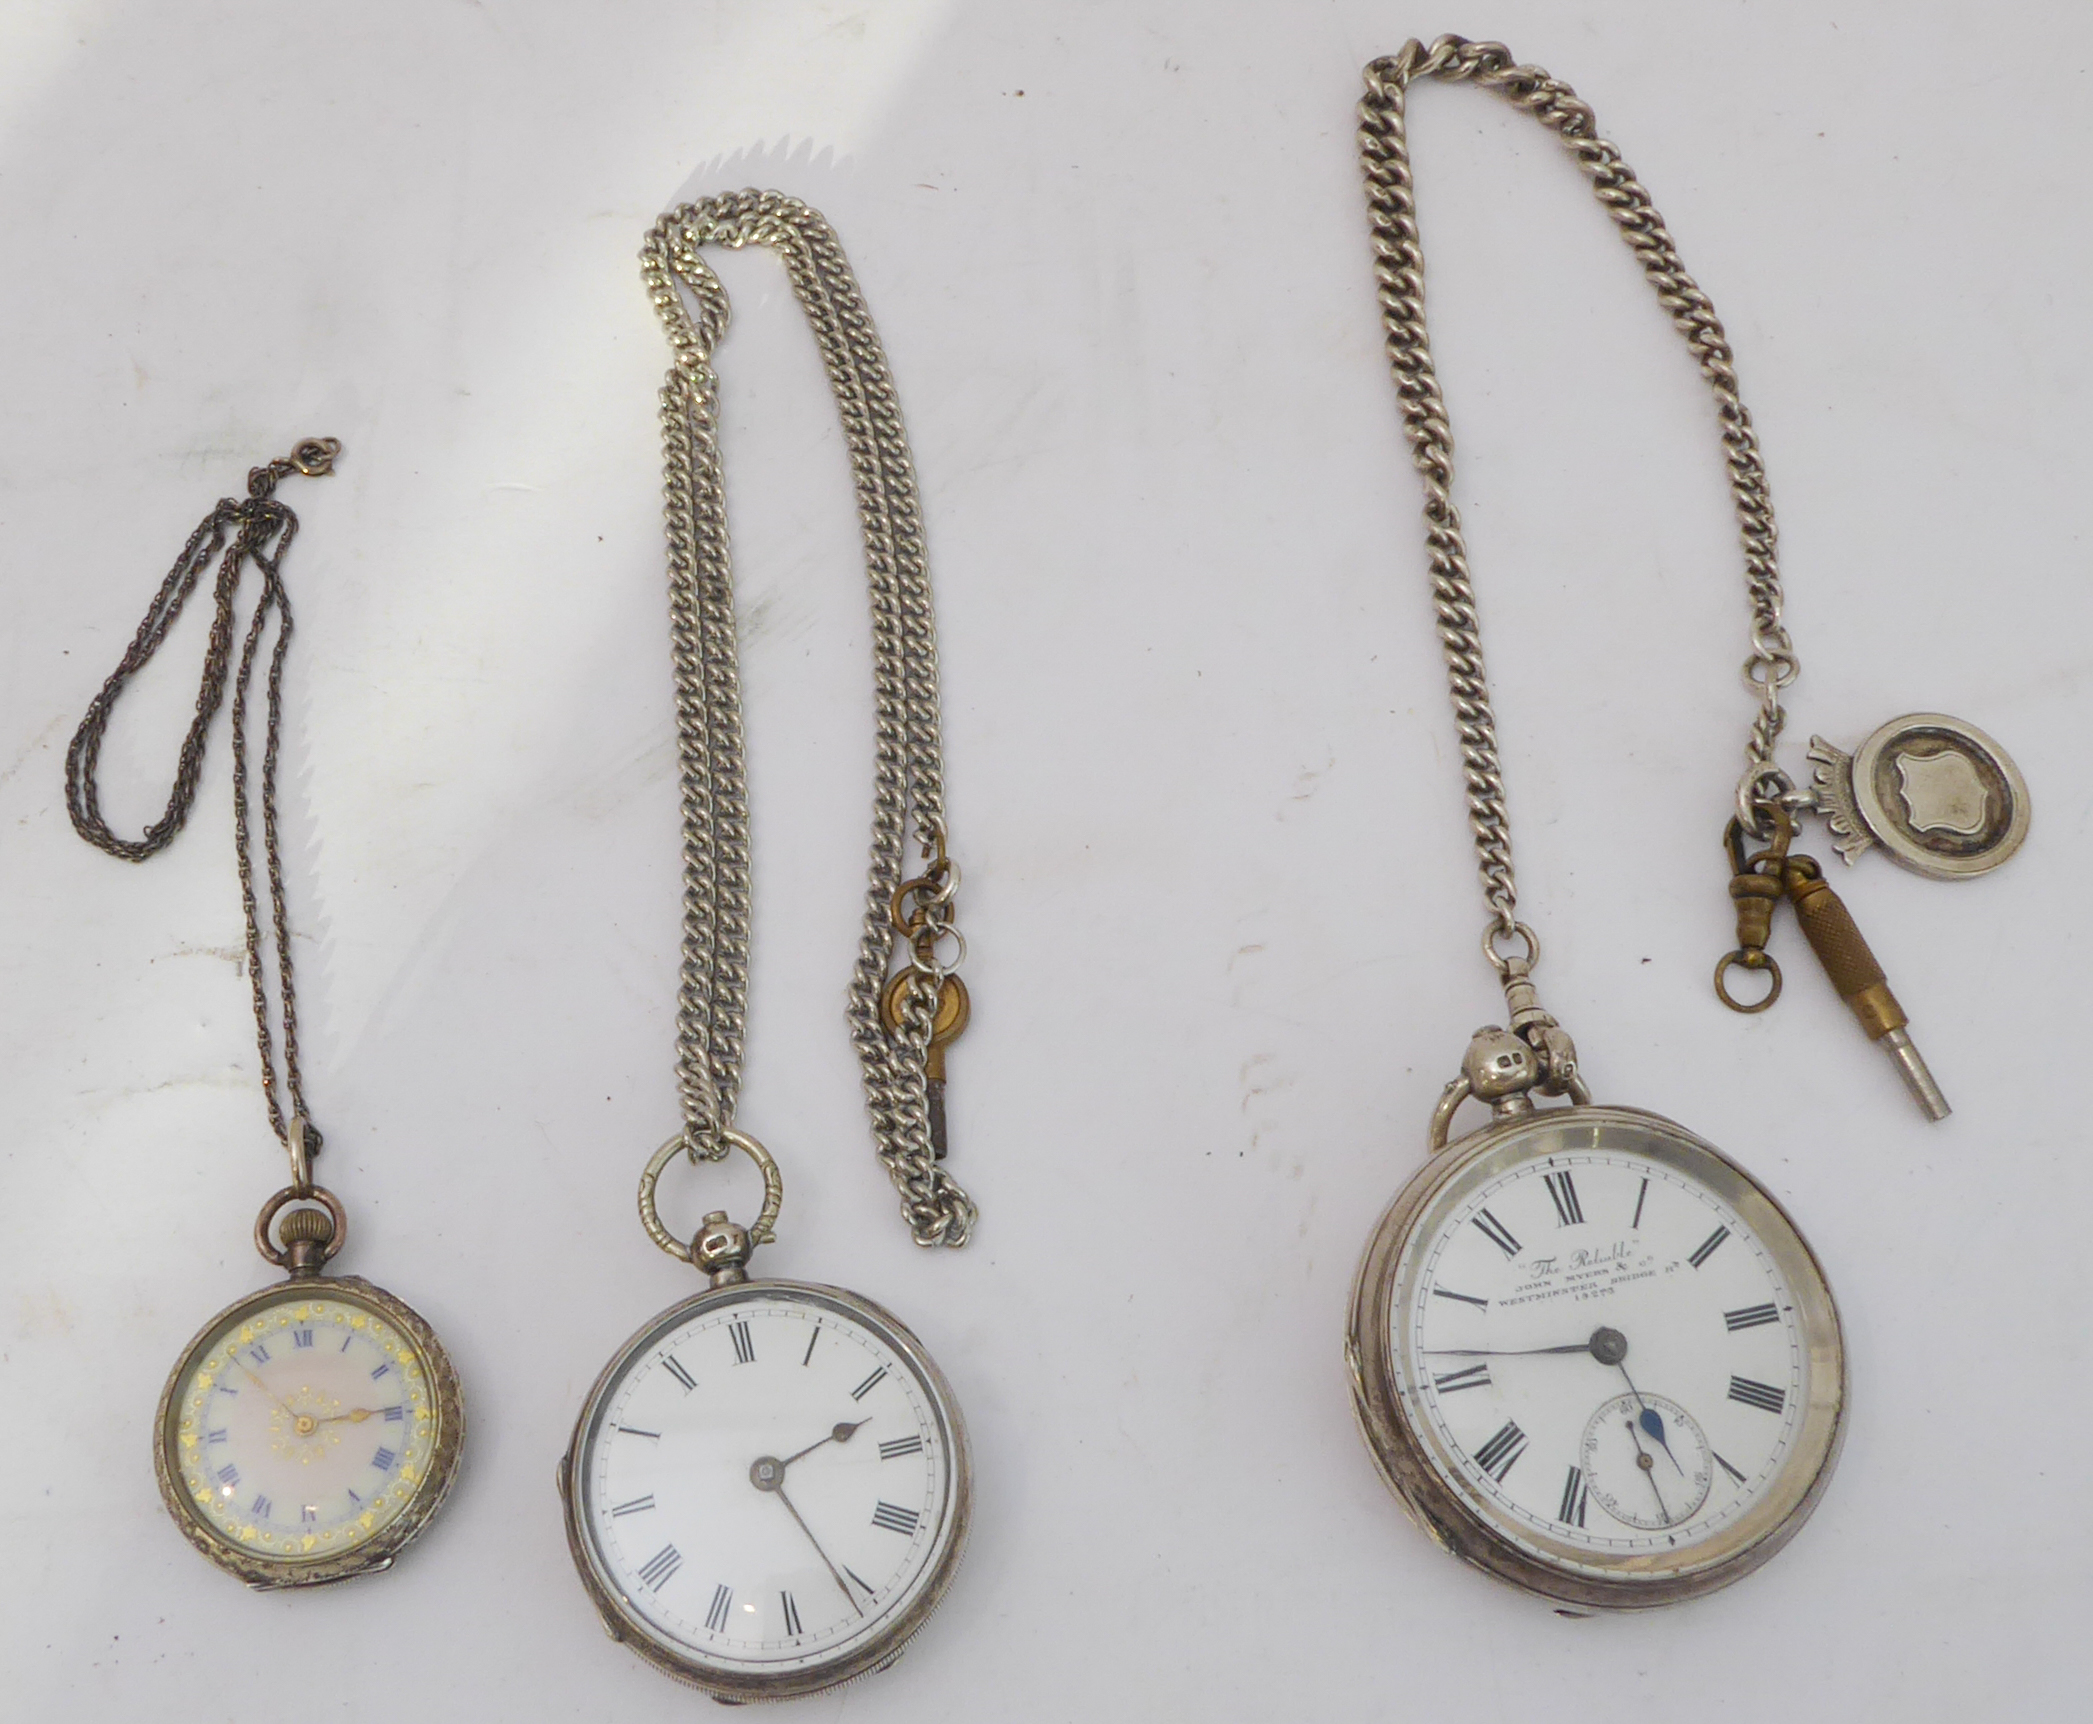 Three open-faced pocket watches: a large gentleman's example marked 'The Reliable: John Myers &